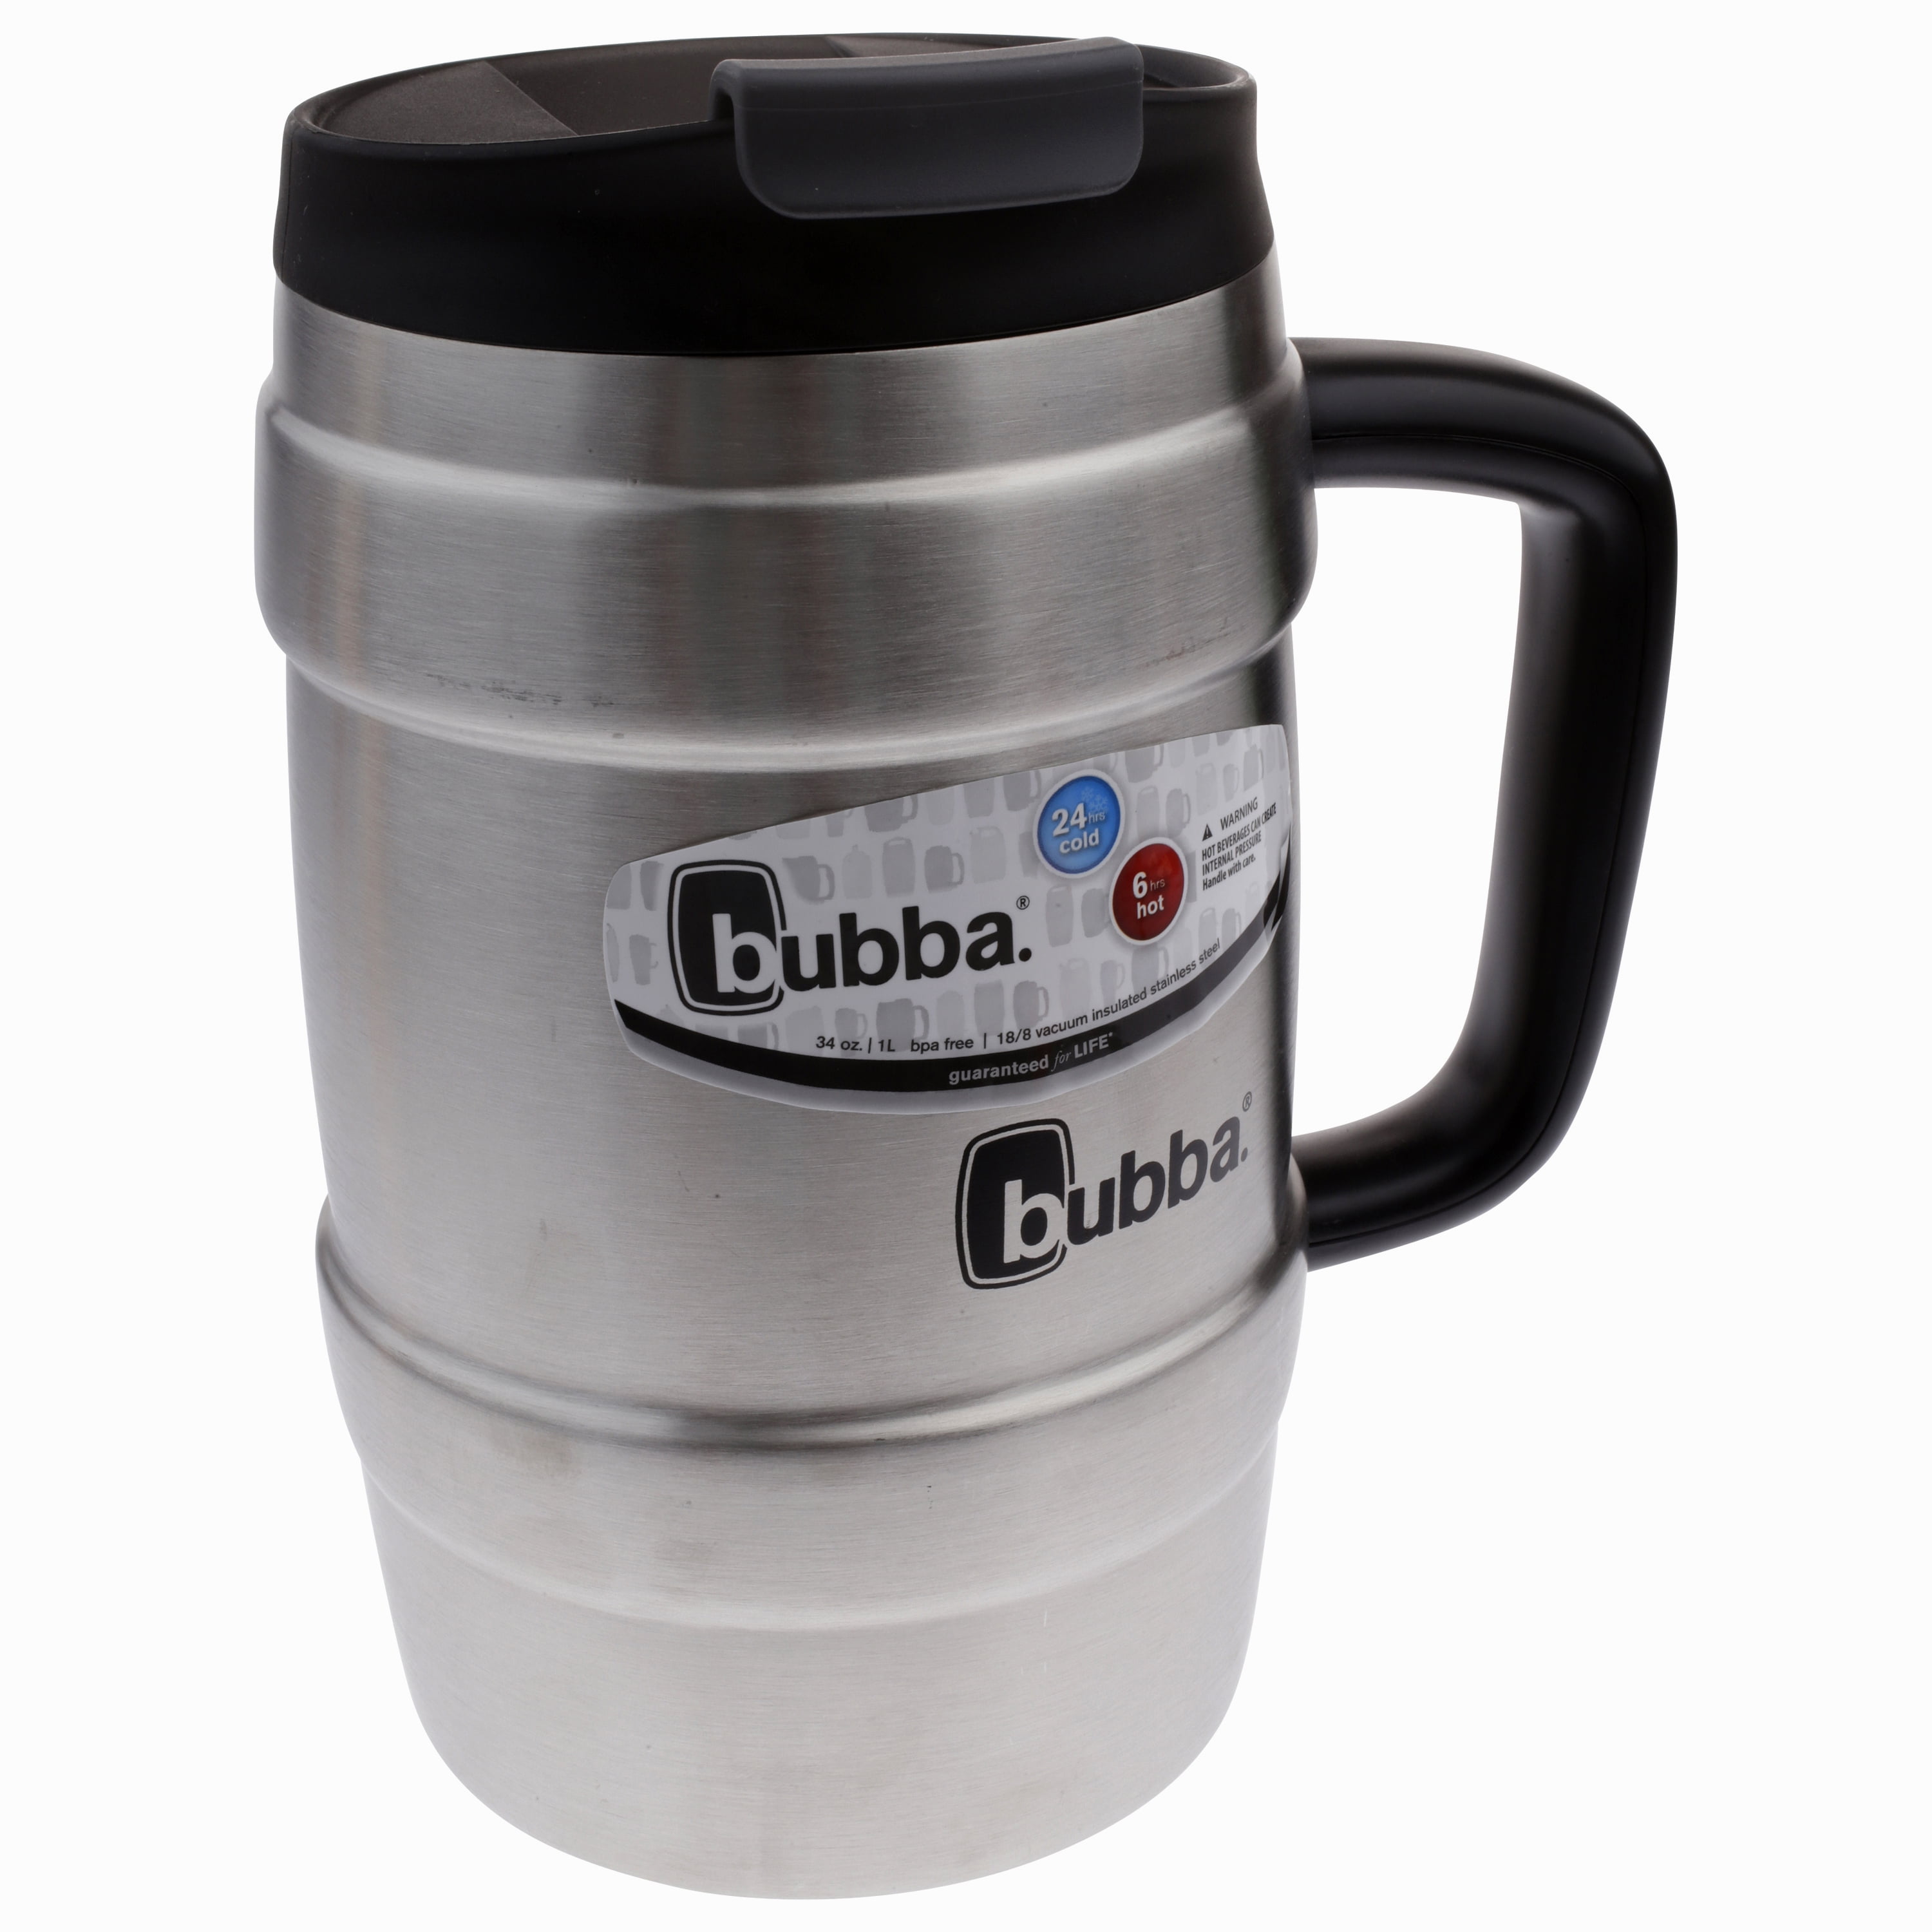 Bubba 34 oz stainless steel